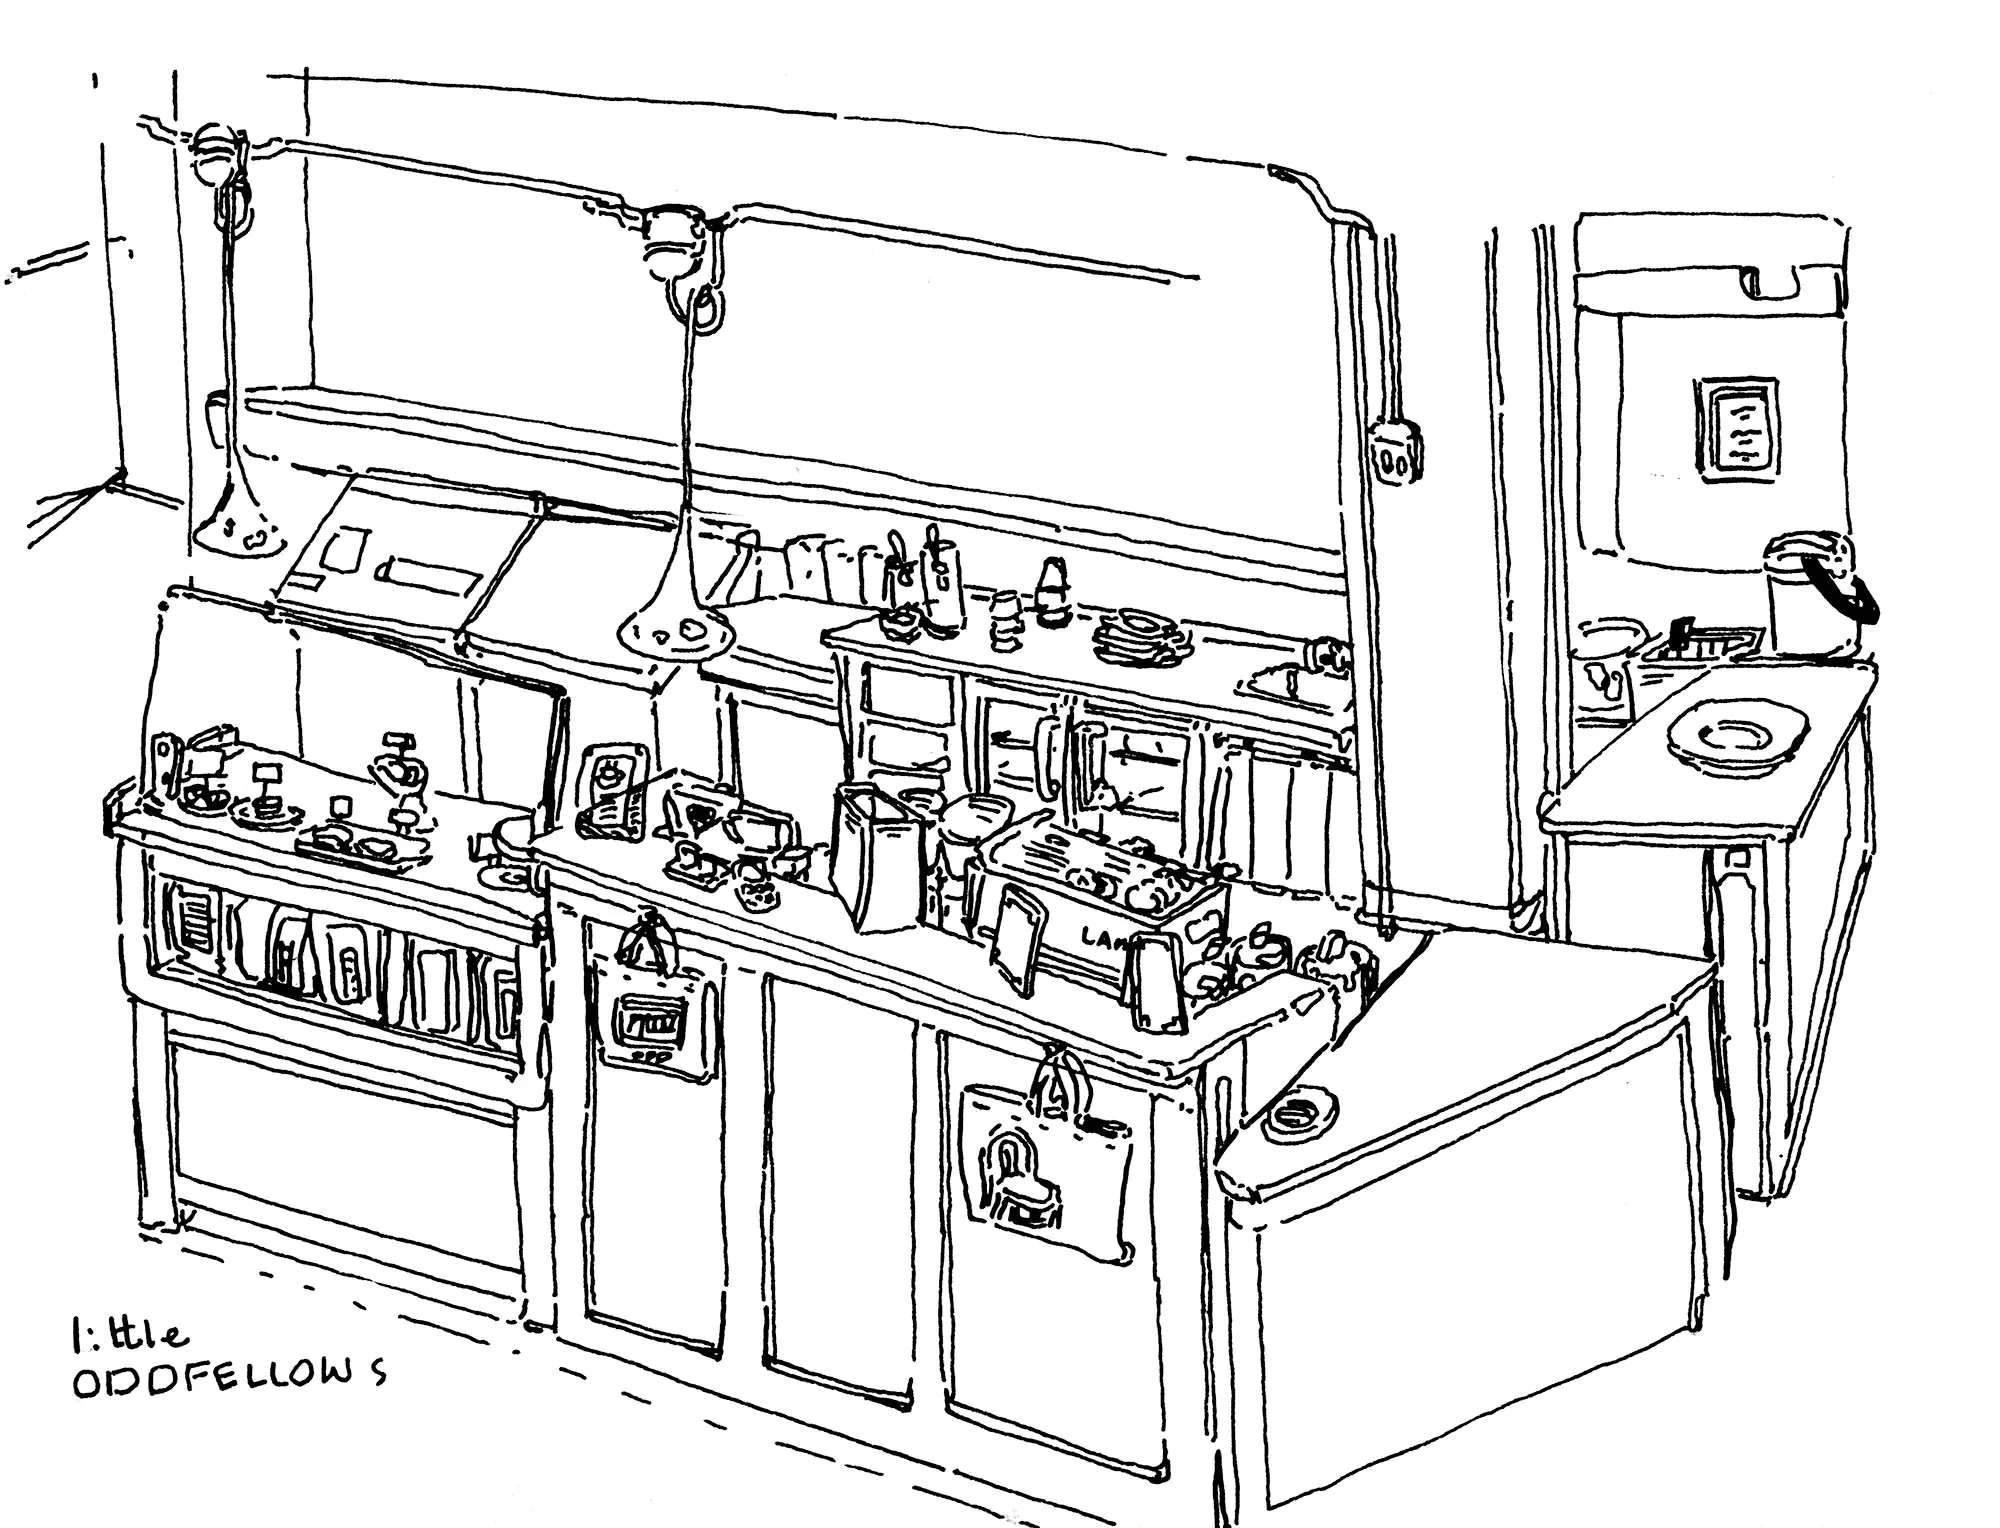  The Little OddFellows in Elliot Bay Books, sketched out in ink
  